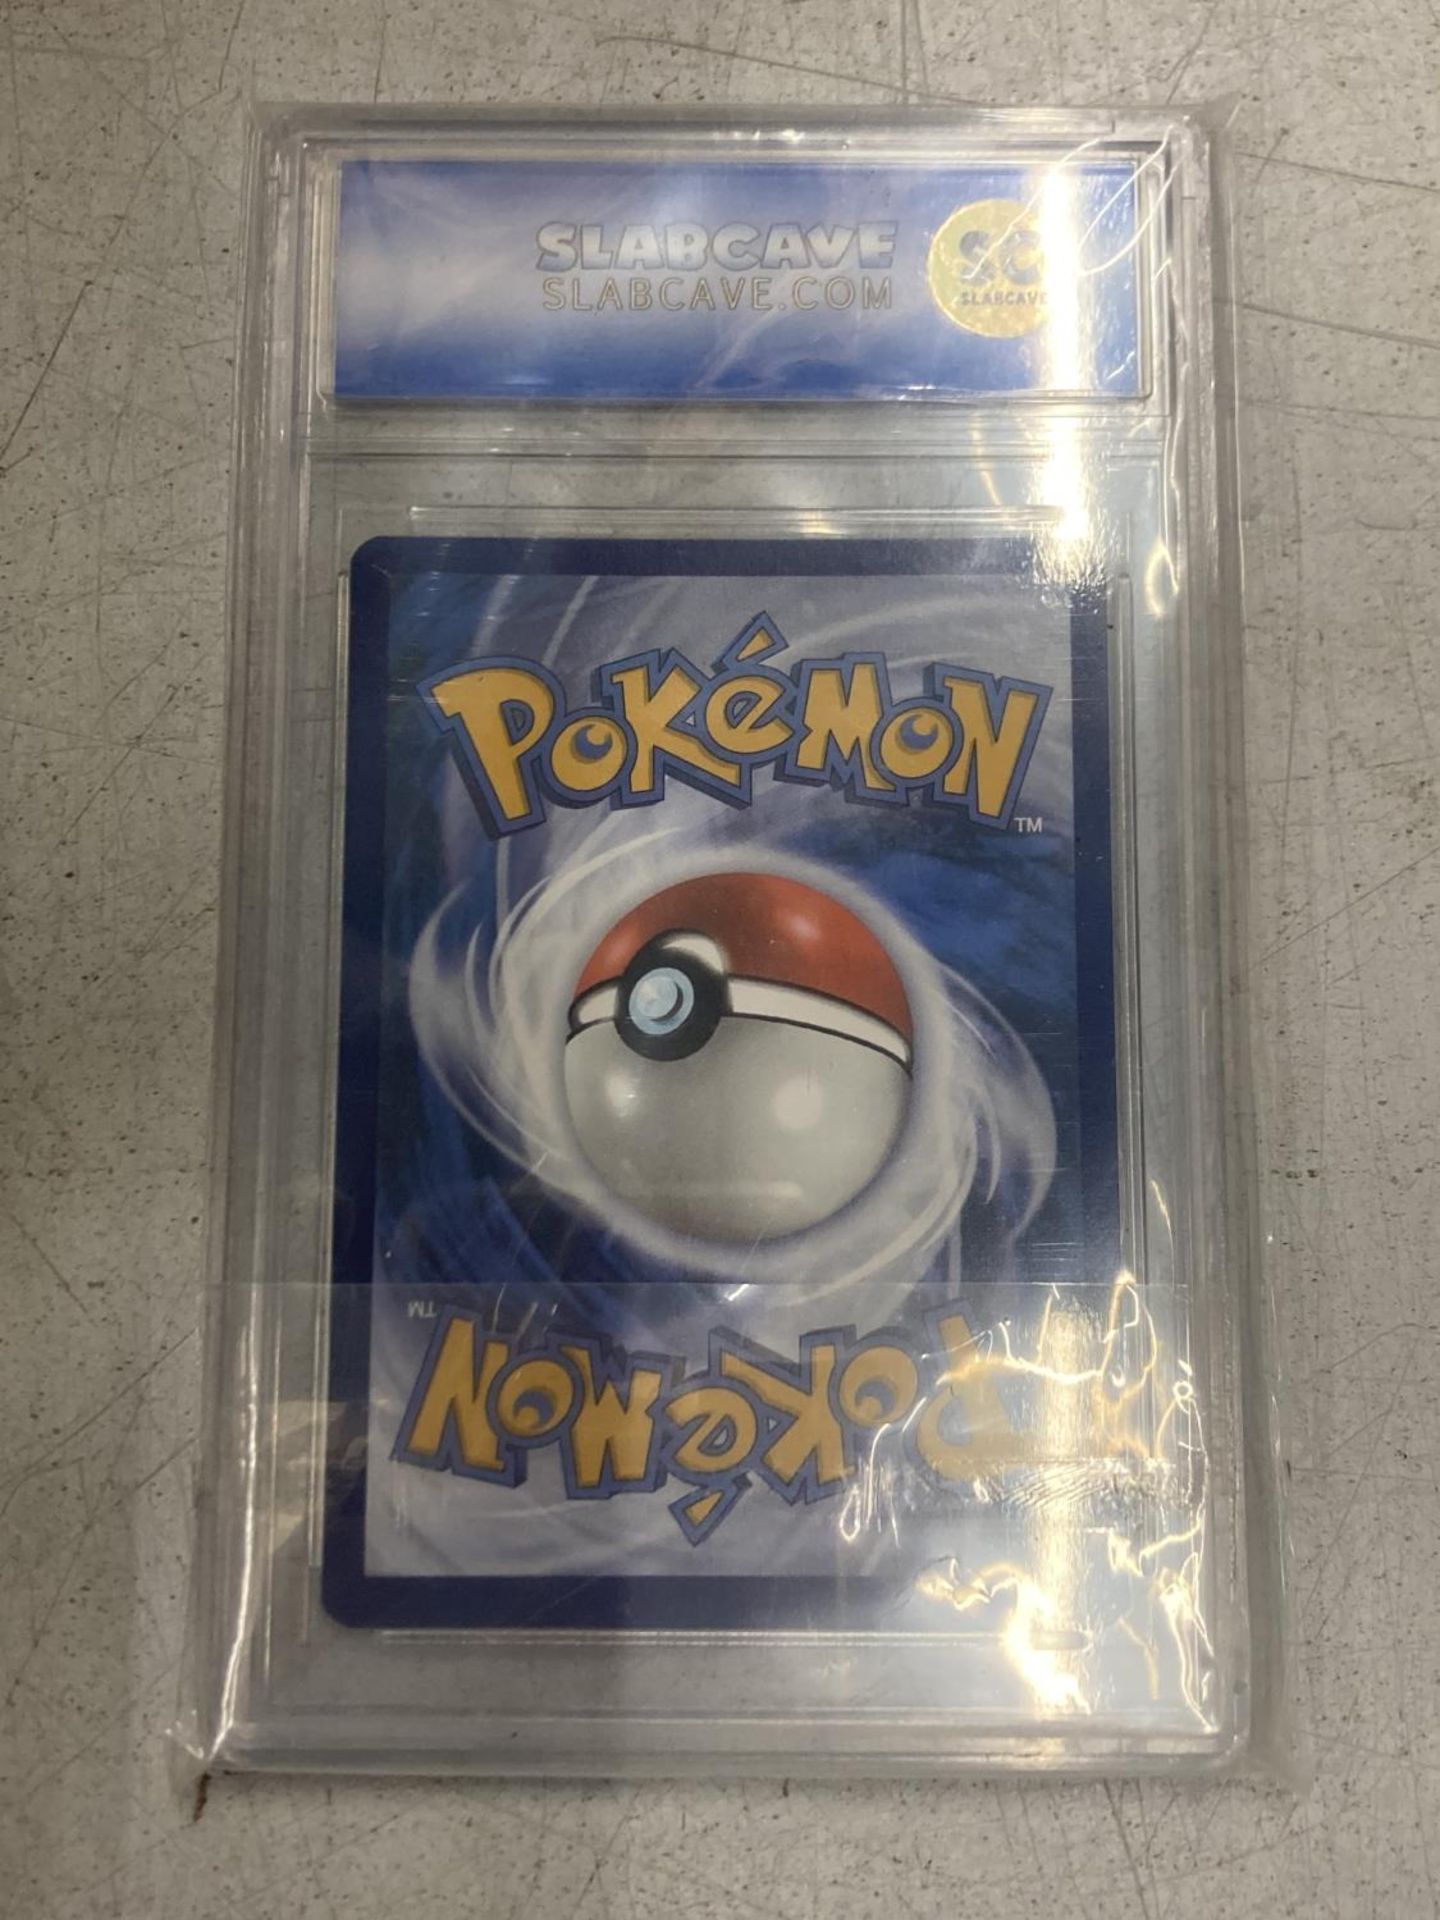 A GRADED POKEMON CARD 10/10 SNOVER - Image 2 of 2